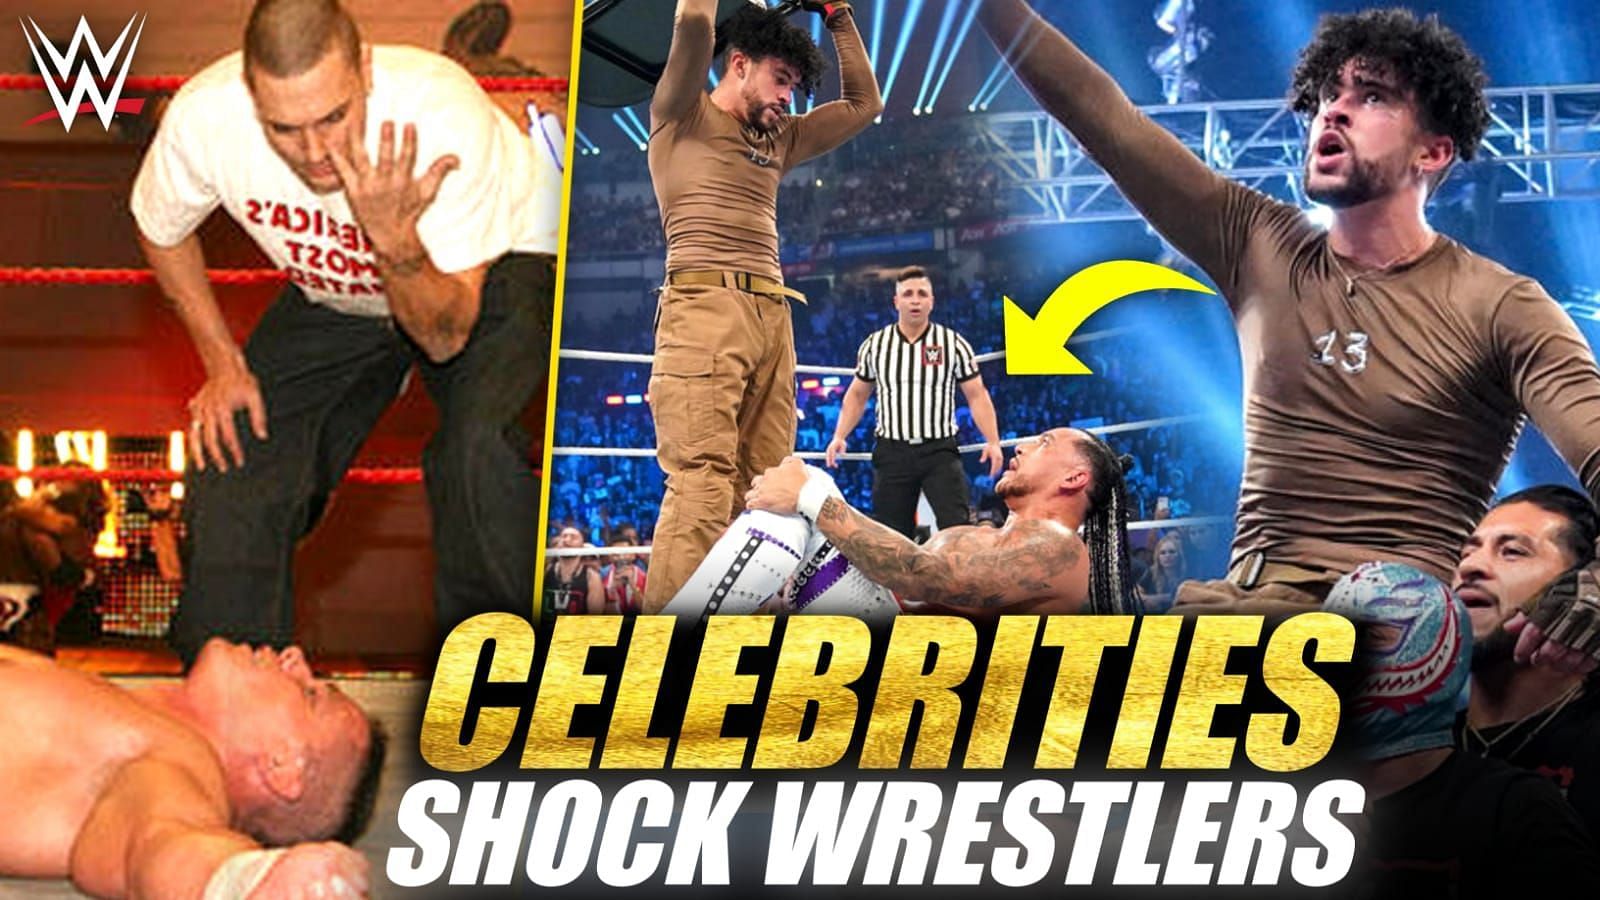 Times when Celebrities defeated WWE Wrestlers!